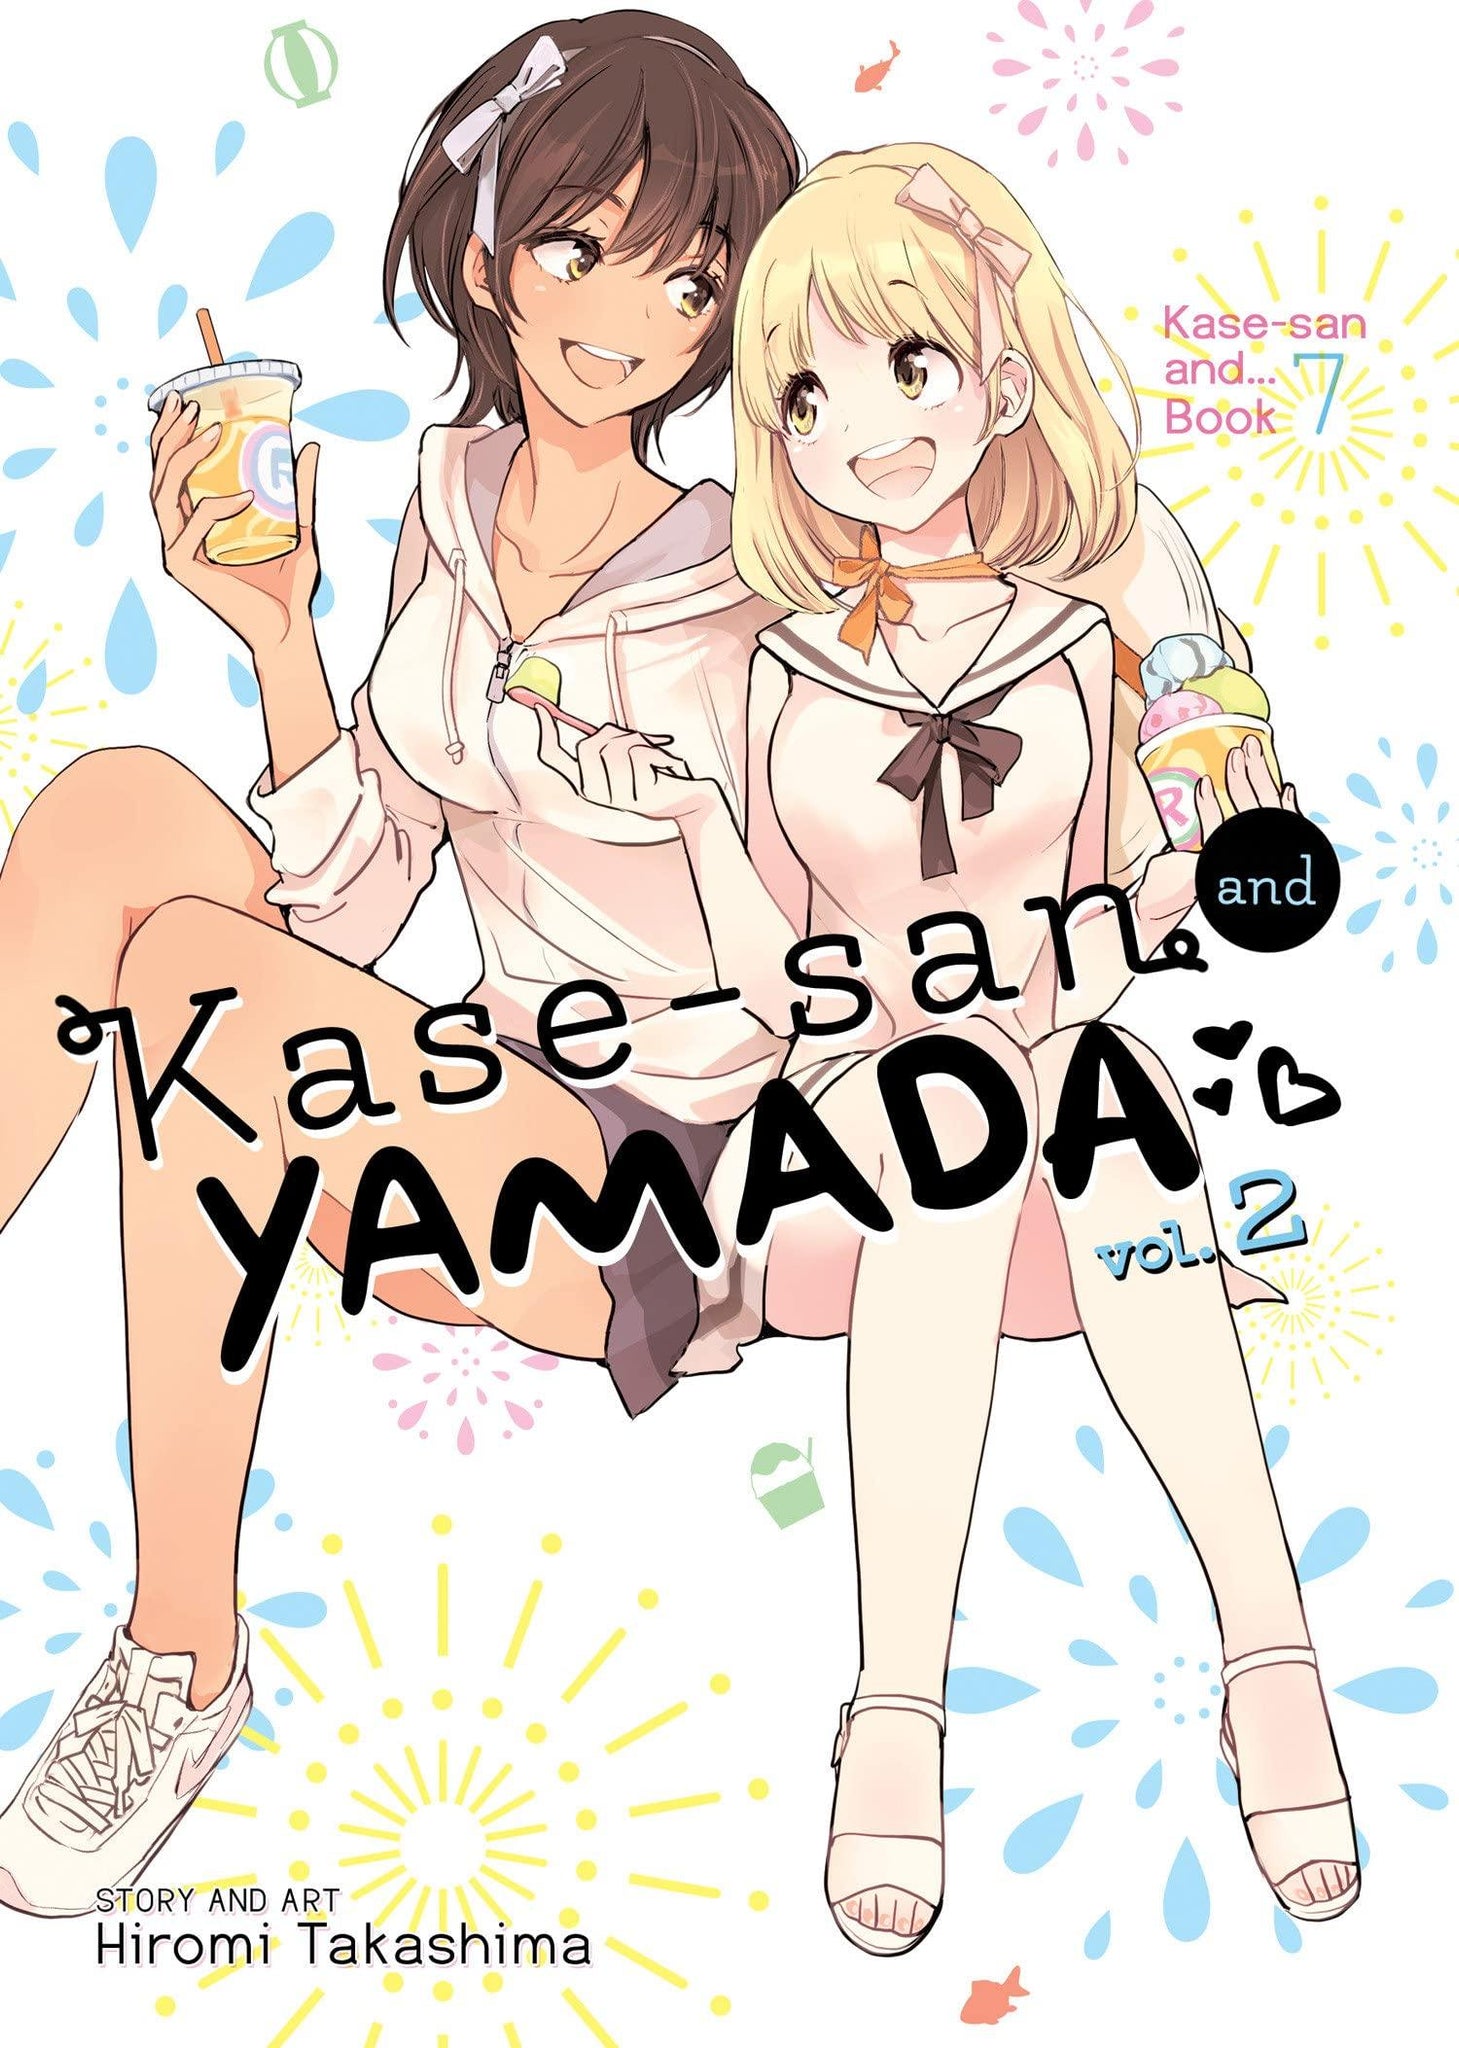 Kase-San and Yamada Vol. 2 - ShopQueer.co